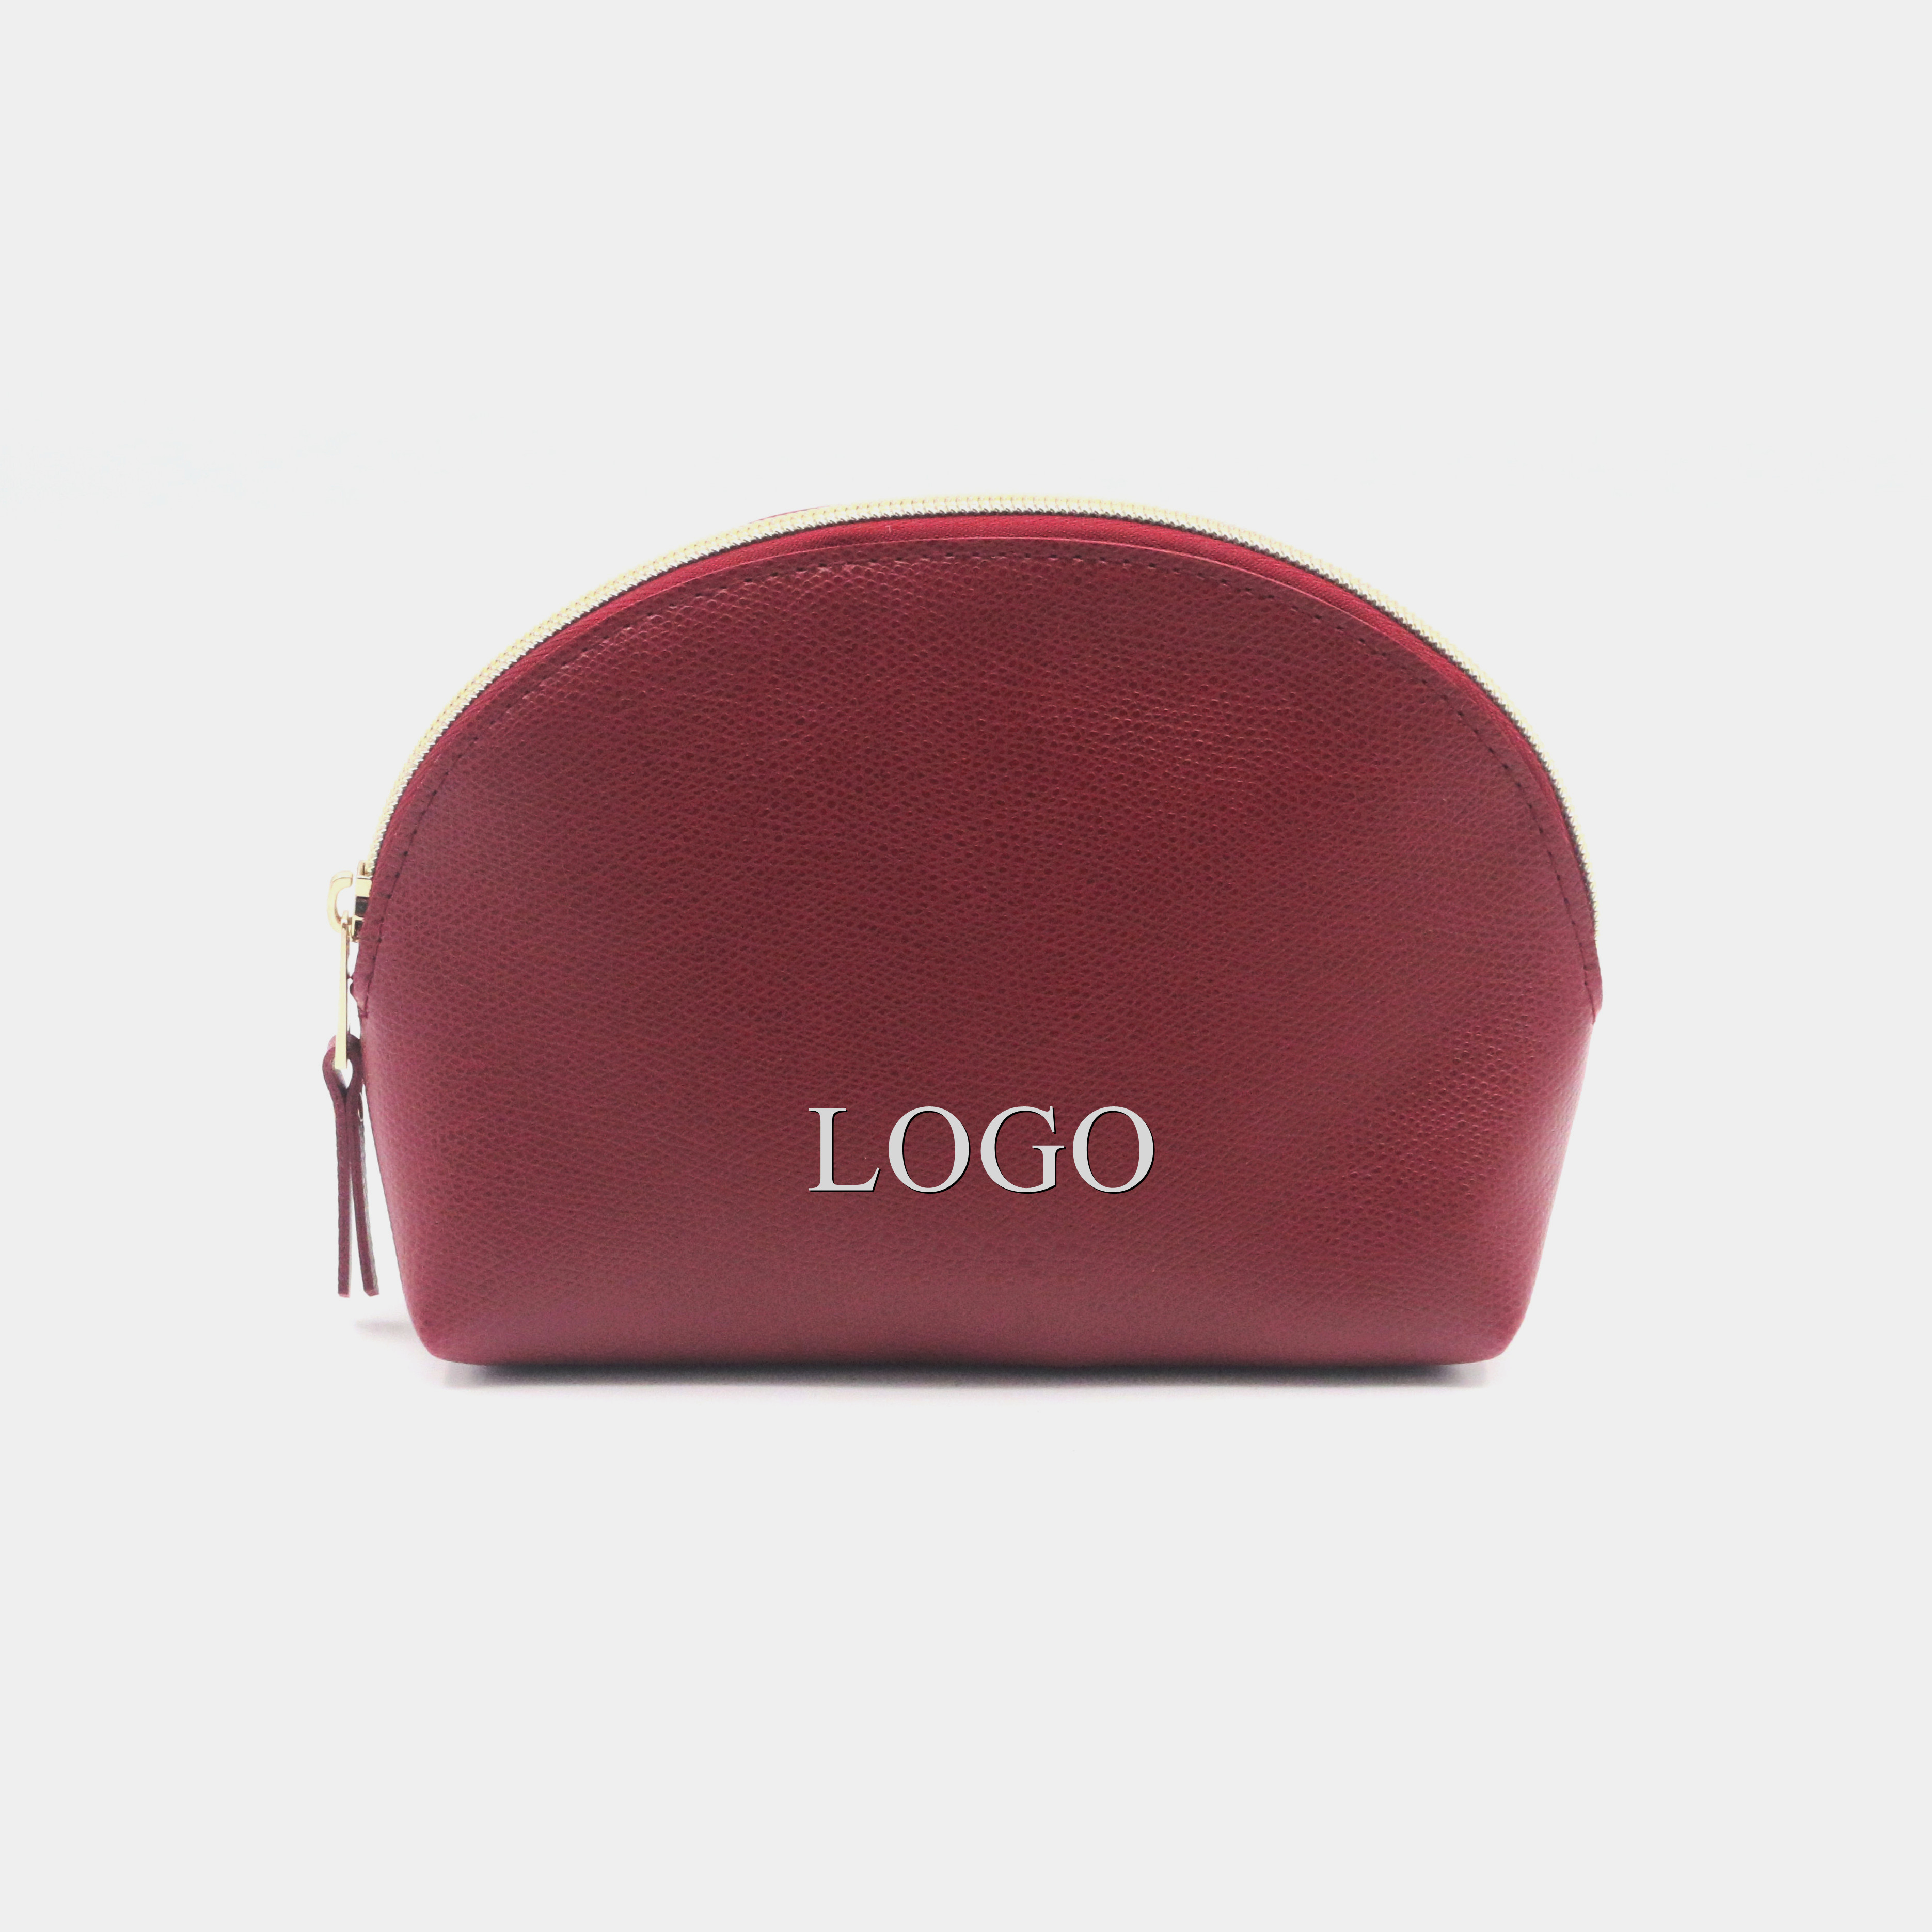 2022 Posh Burgundy Water-based PU Makeup Pouch Vegan Leather Small Coin Purse Waterproof PU Women Cosmetic Pouch